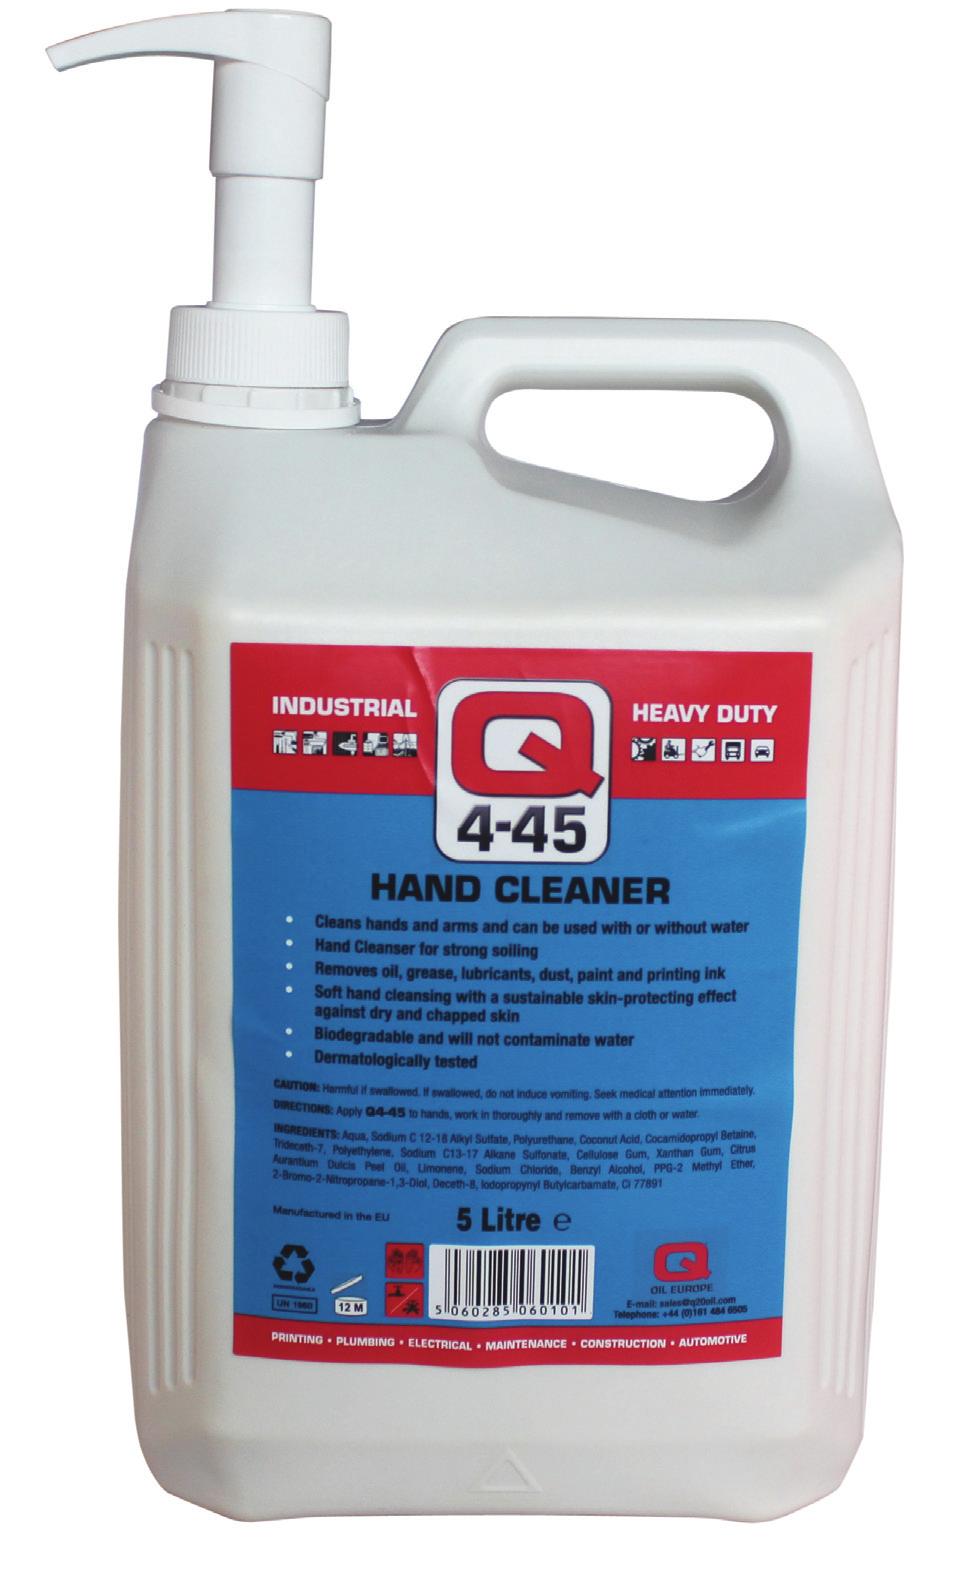 4-45 hand cleaner Removes oil, grease, wet paint, printing ink & bitumen Safe, antiseptic & nonabrasive Also cleans PVC floor tiles, plastic goods & enamel products Product information Q4:45 is based